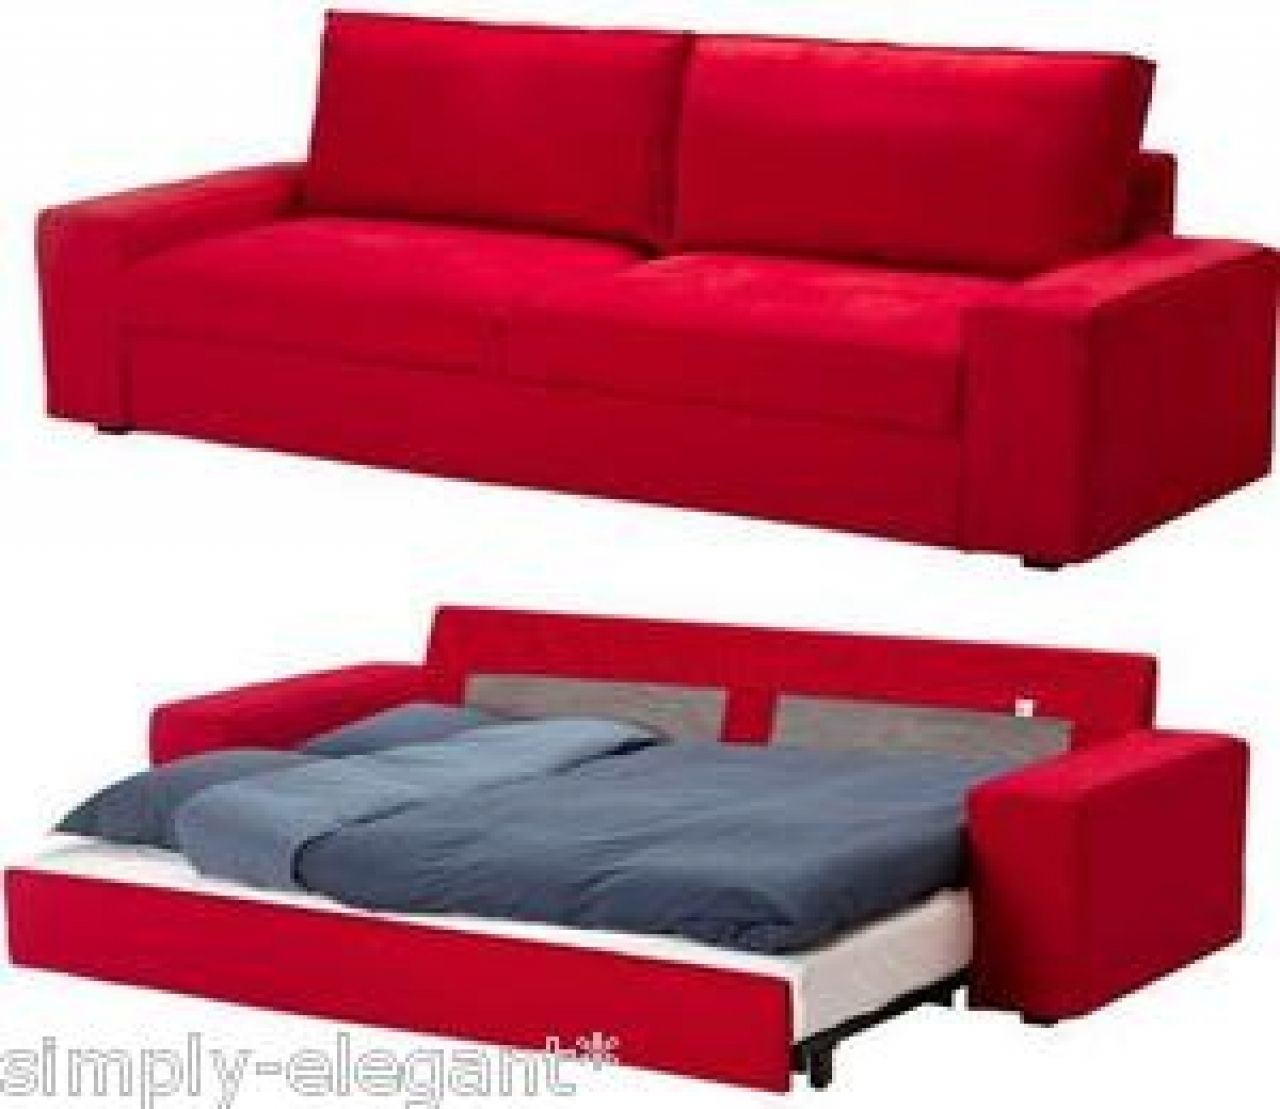 Red Sleeper Sofa Medium Office Chairs Bedroom Furniture Bed Frames Intended For Red Sleeper Sofas (Photo 4 of 12)